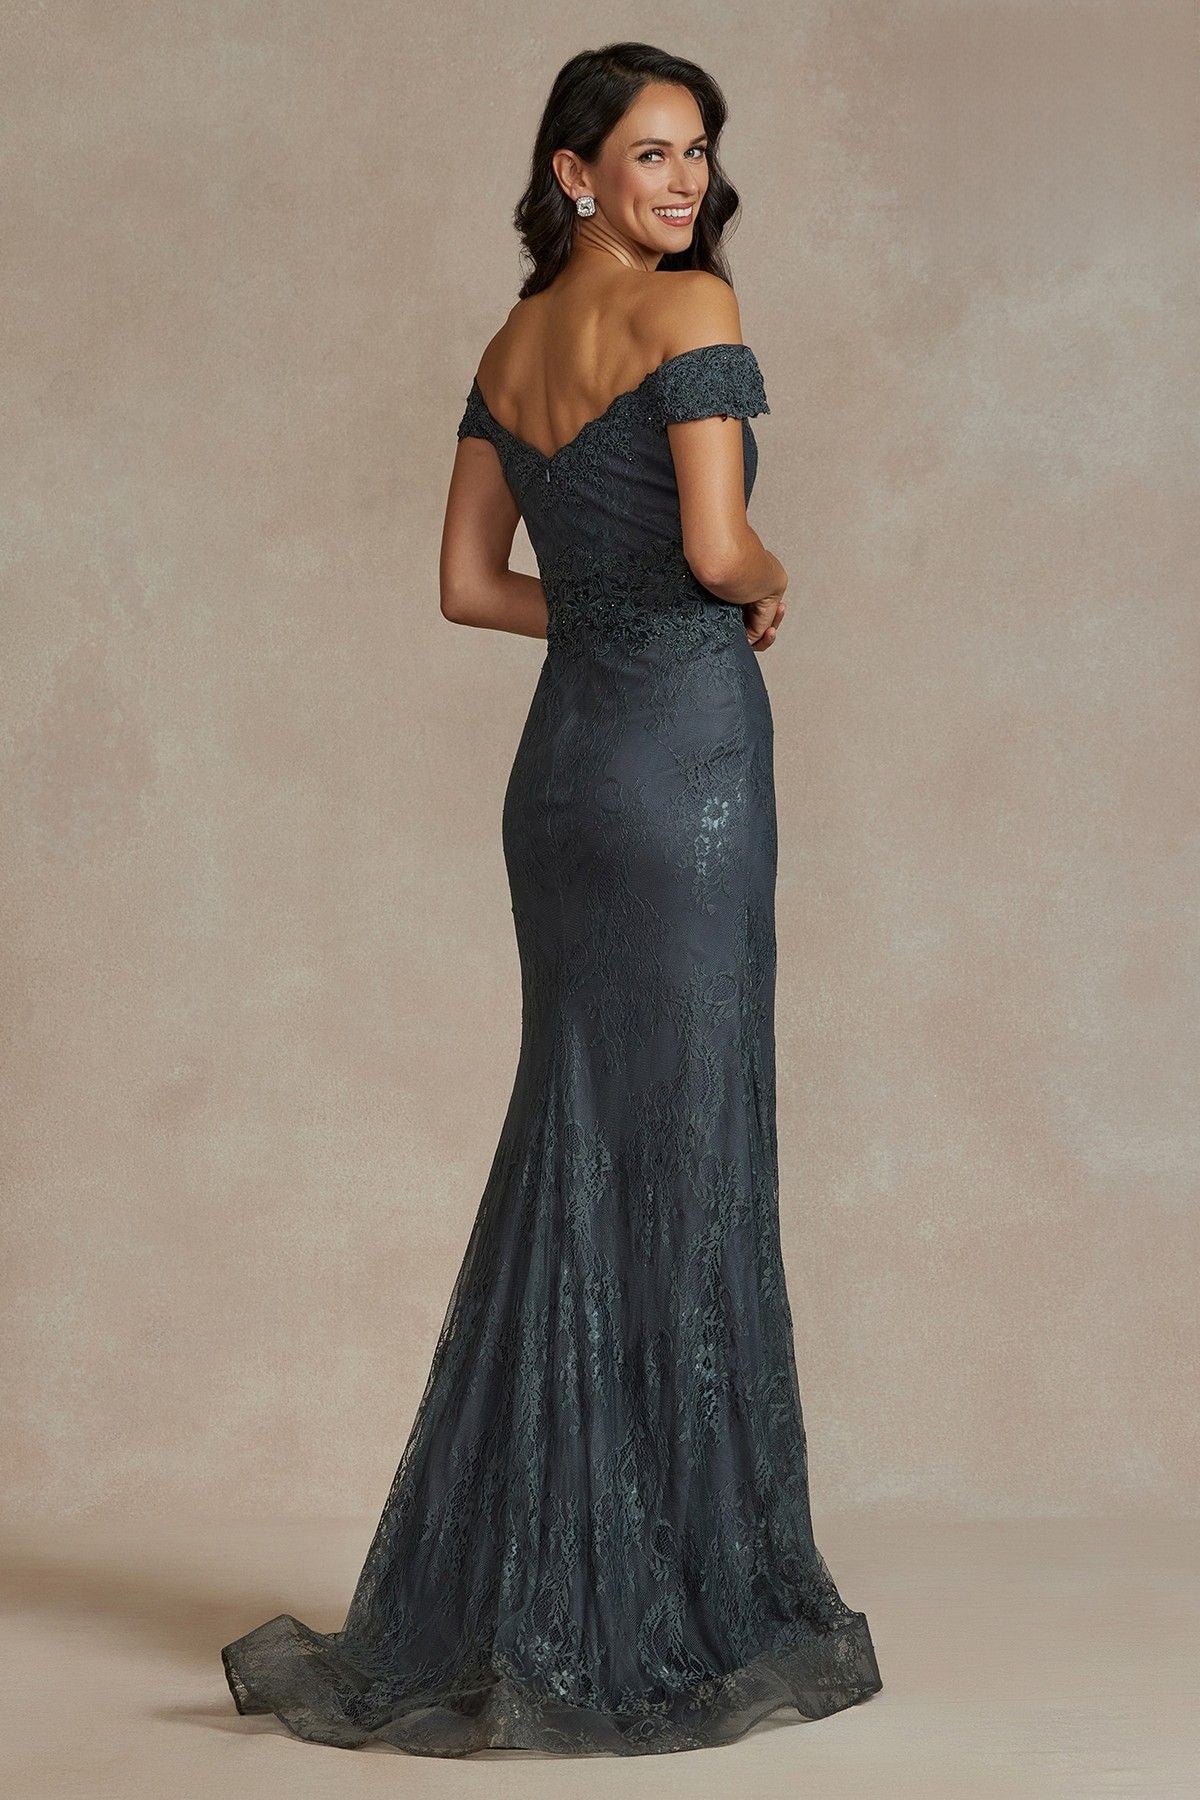 Off Shoulder Open Back Embroidered Lace Long Mother of the Bride Dress NXJQ501-Mother of the Bride Dress-smcfashion.com